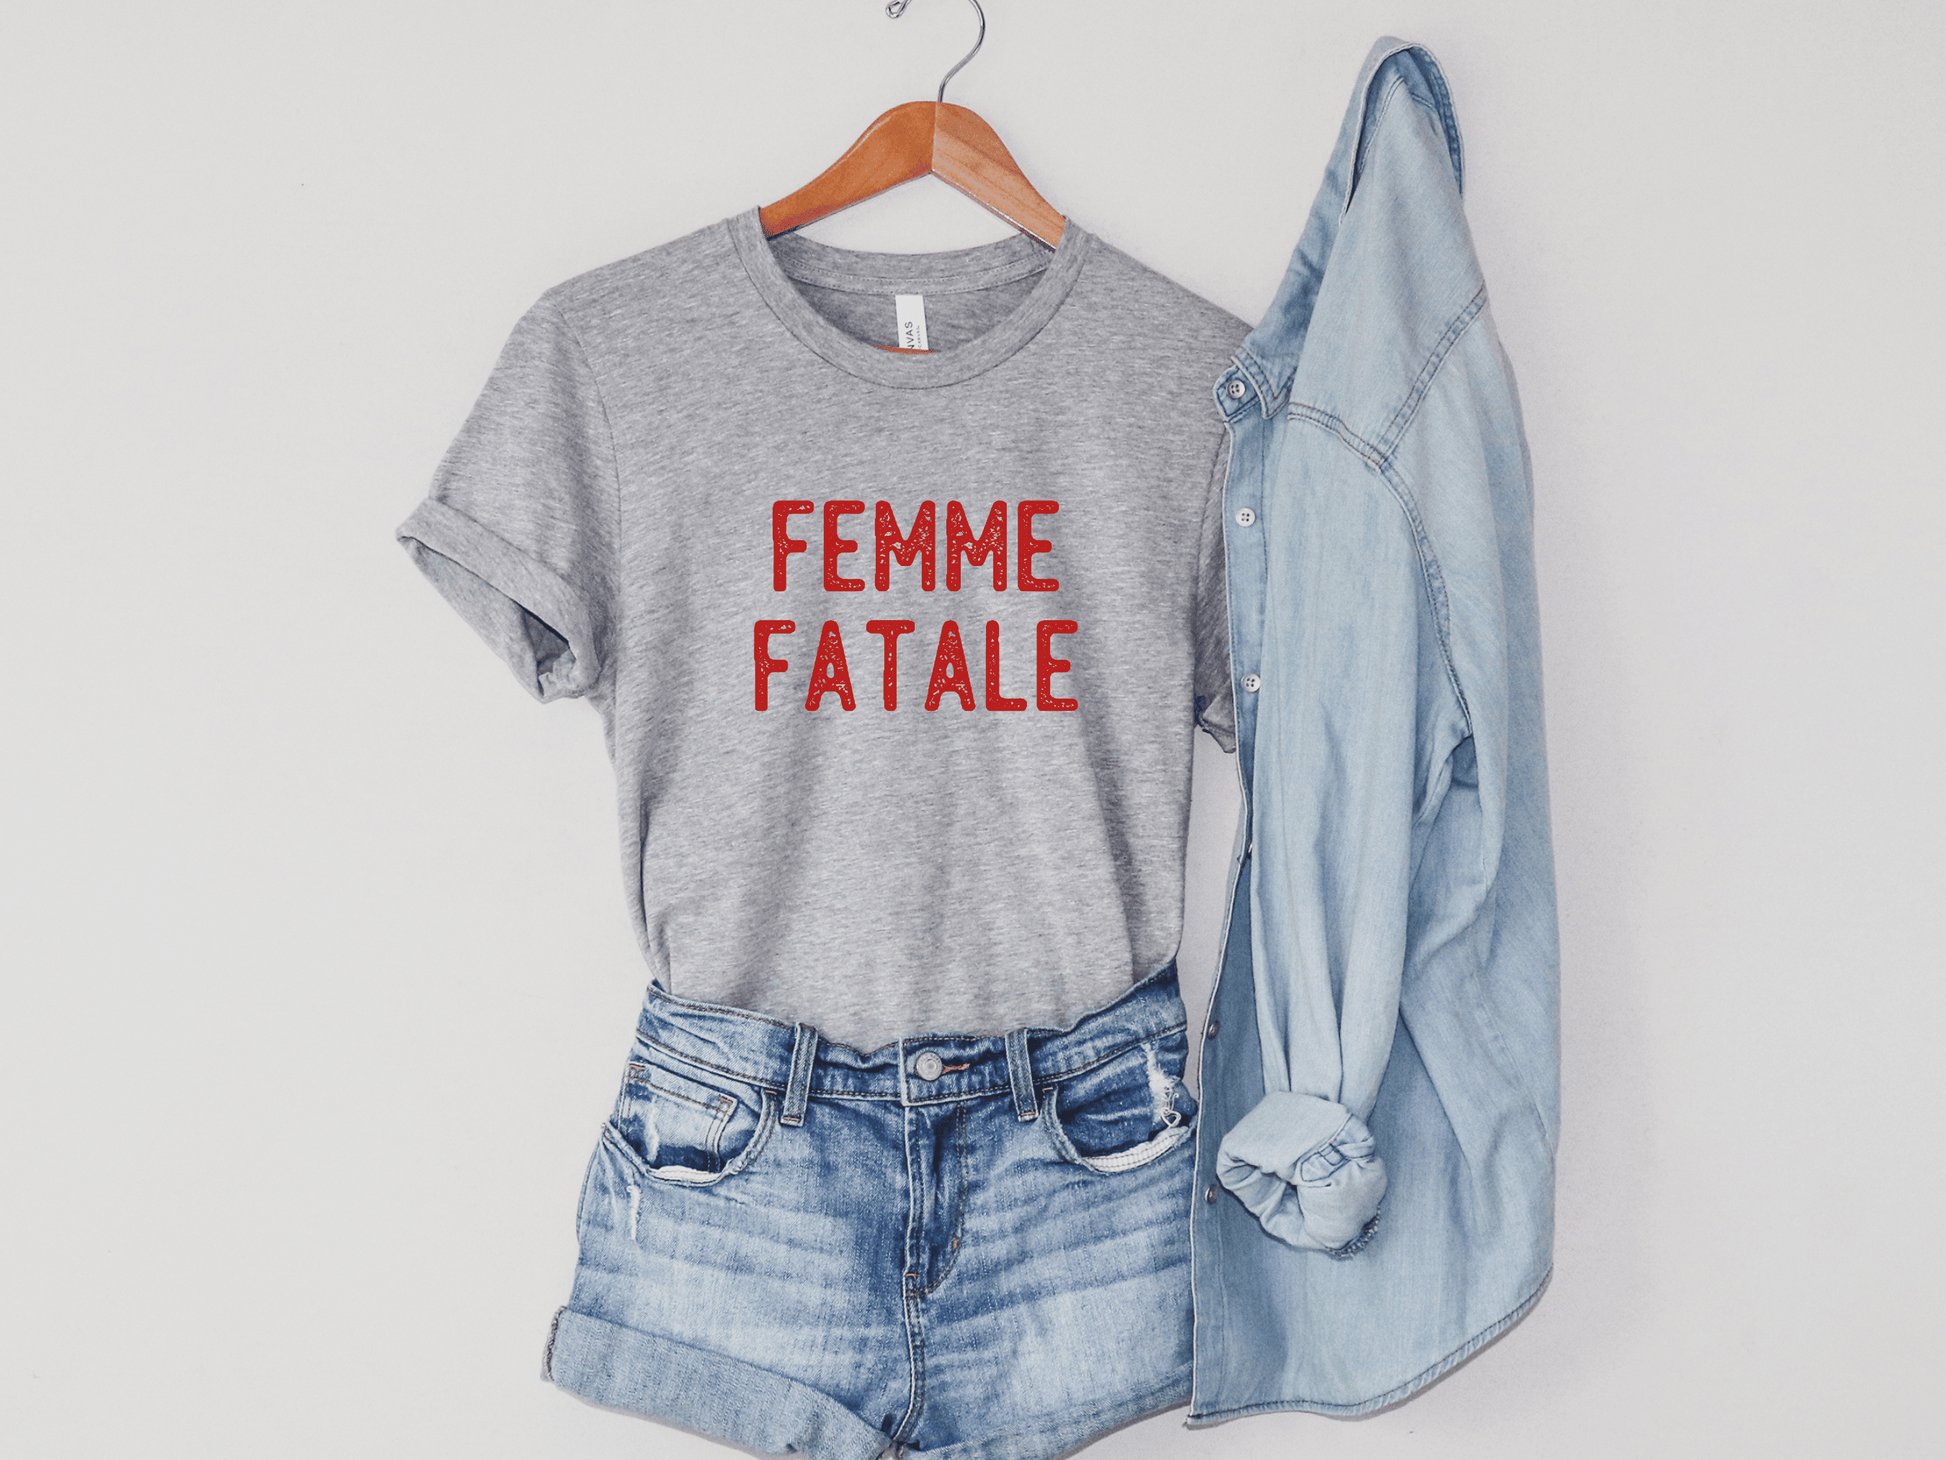 Femme Fatale T-Shirt in Athletic Gray on a Hanger.